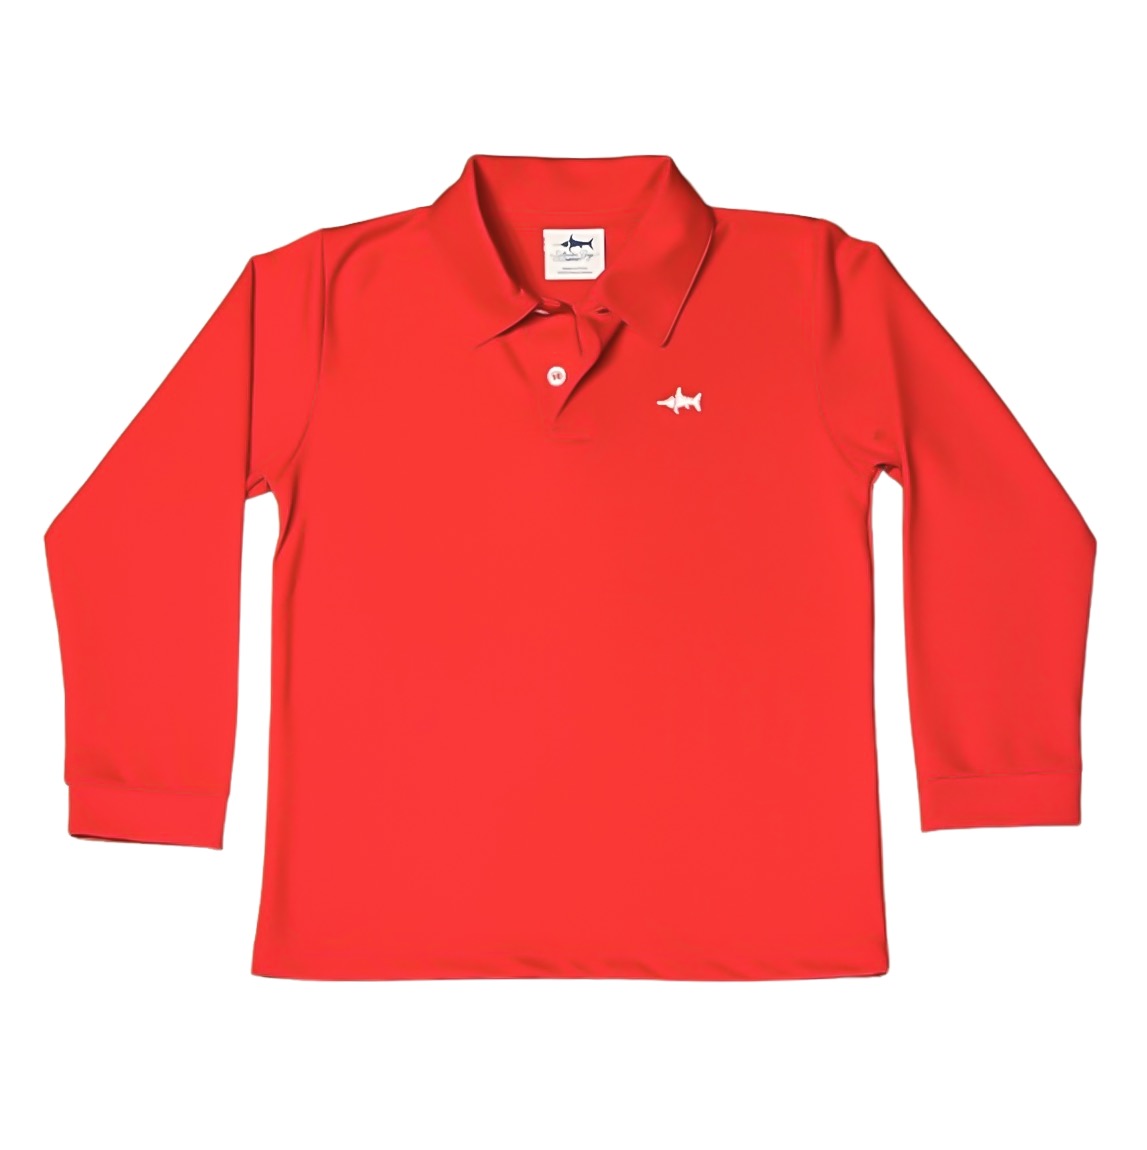 Saltwater Boys LS Pima Polo - Red